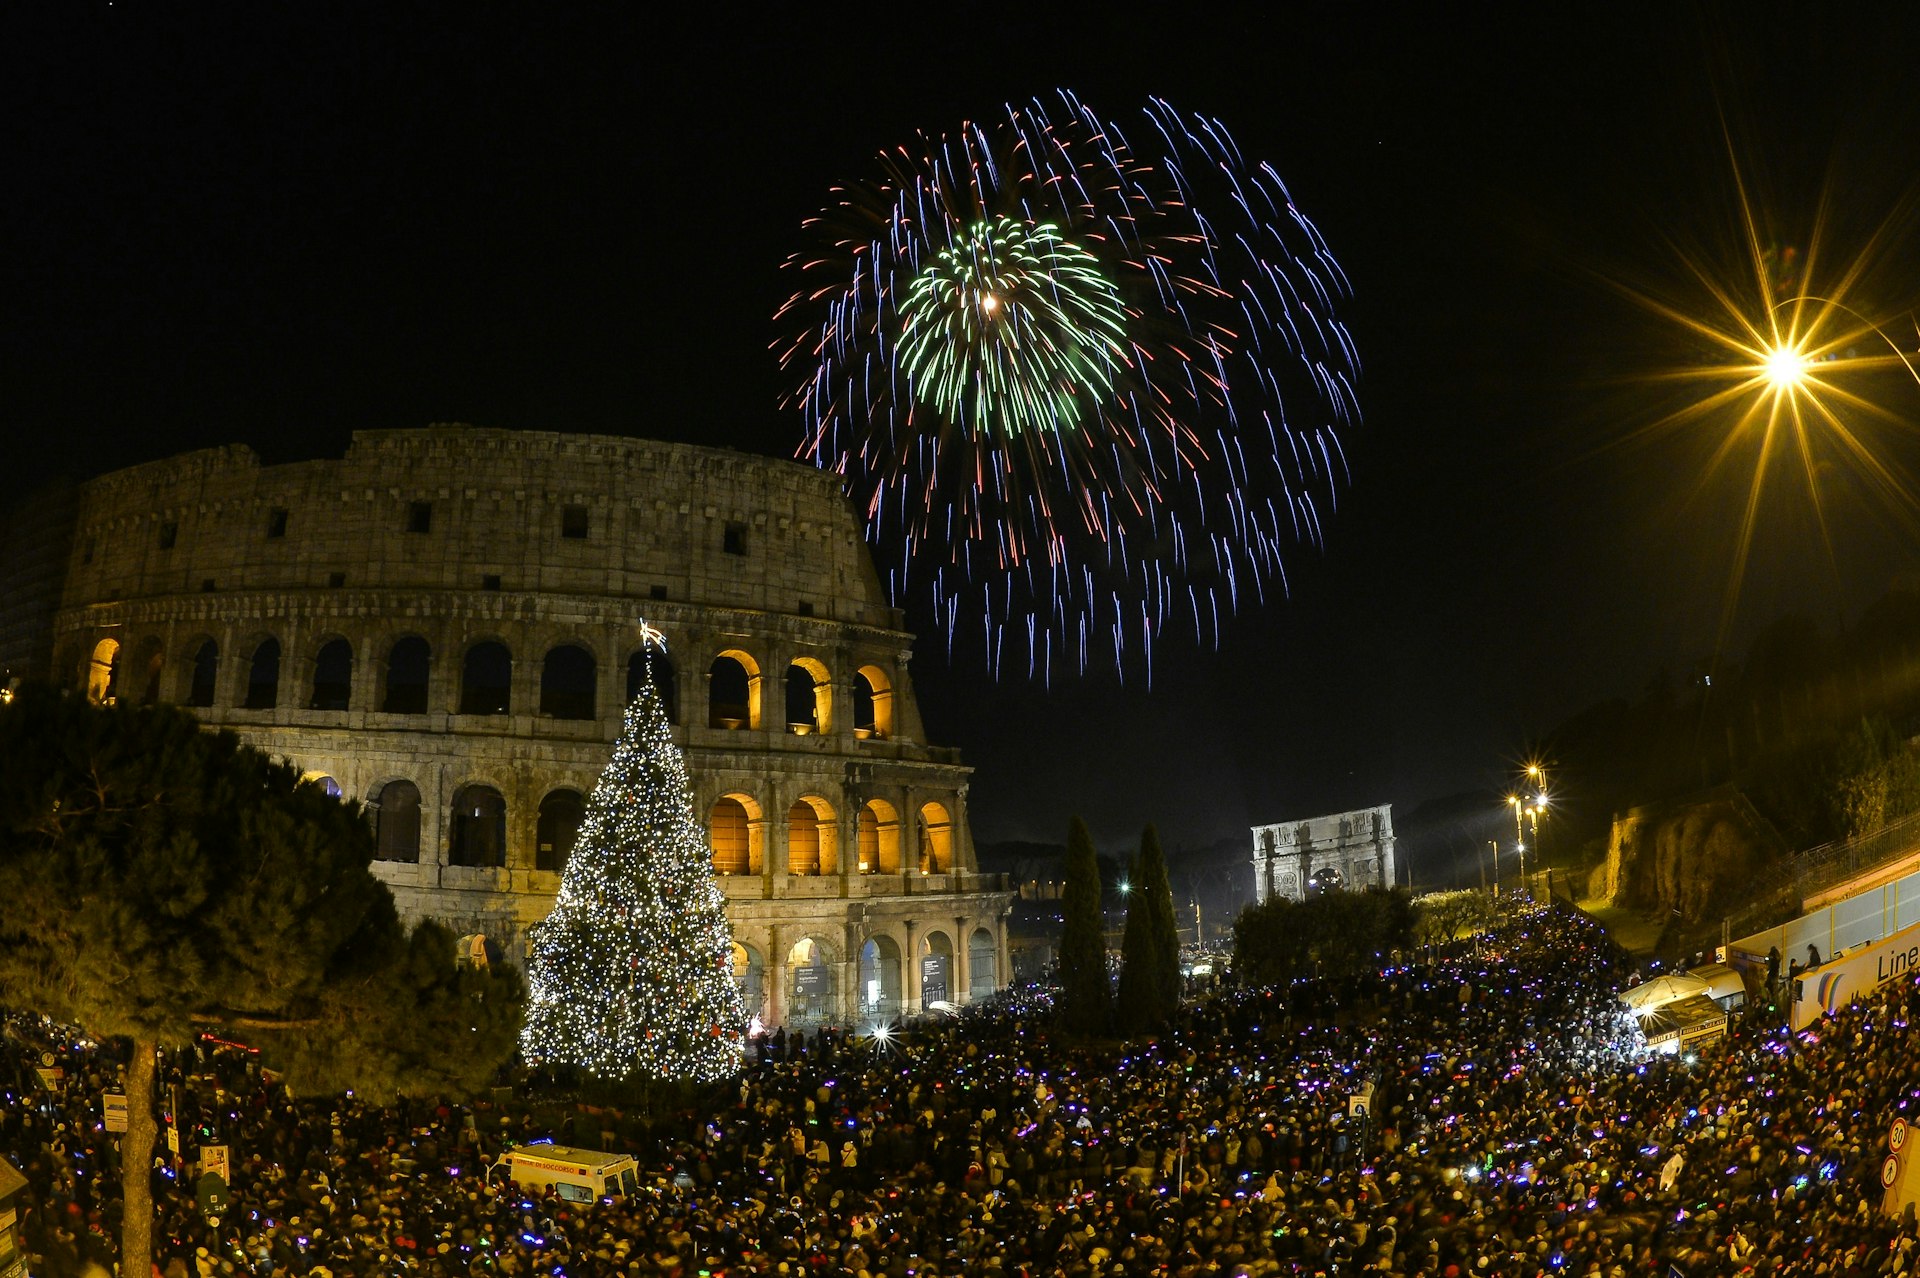 People cheer in front of Rome's ancient Colosseum as fireworks explode to celebrate the new year.